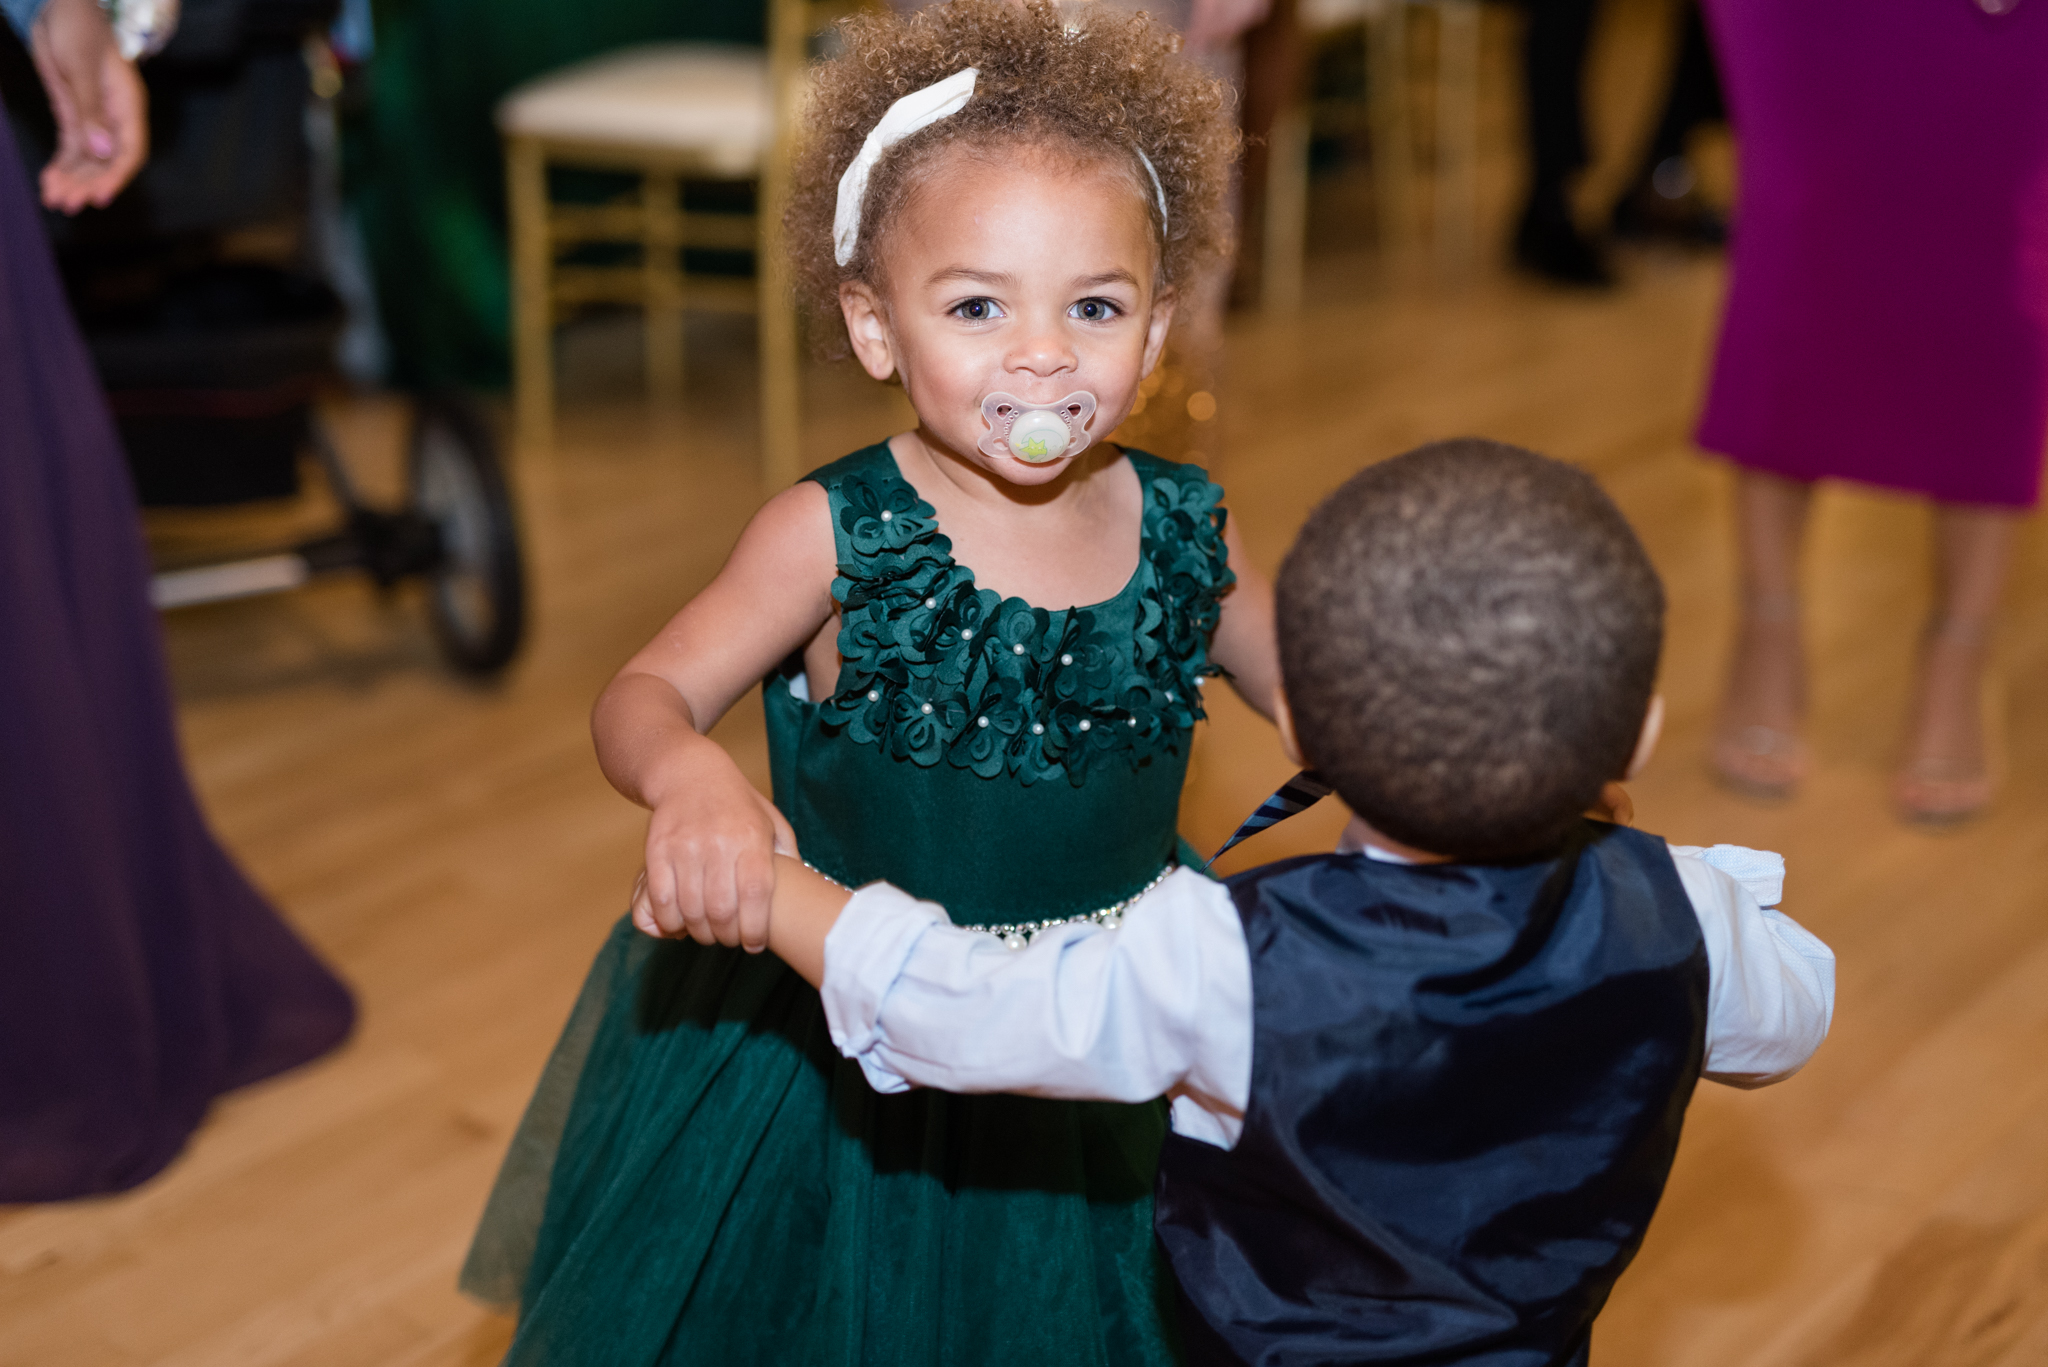 Little girl and boy dance at wedding reception.